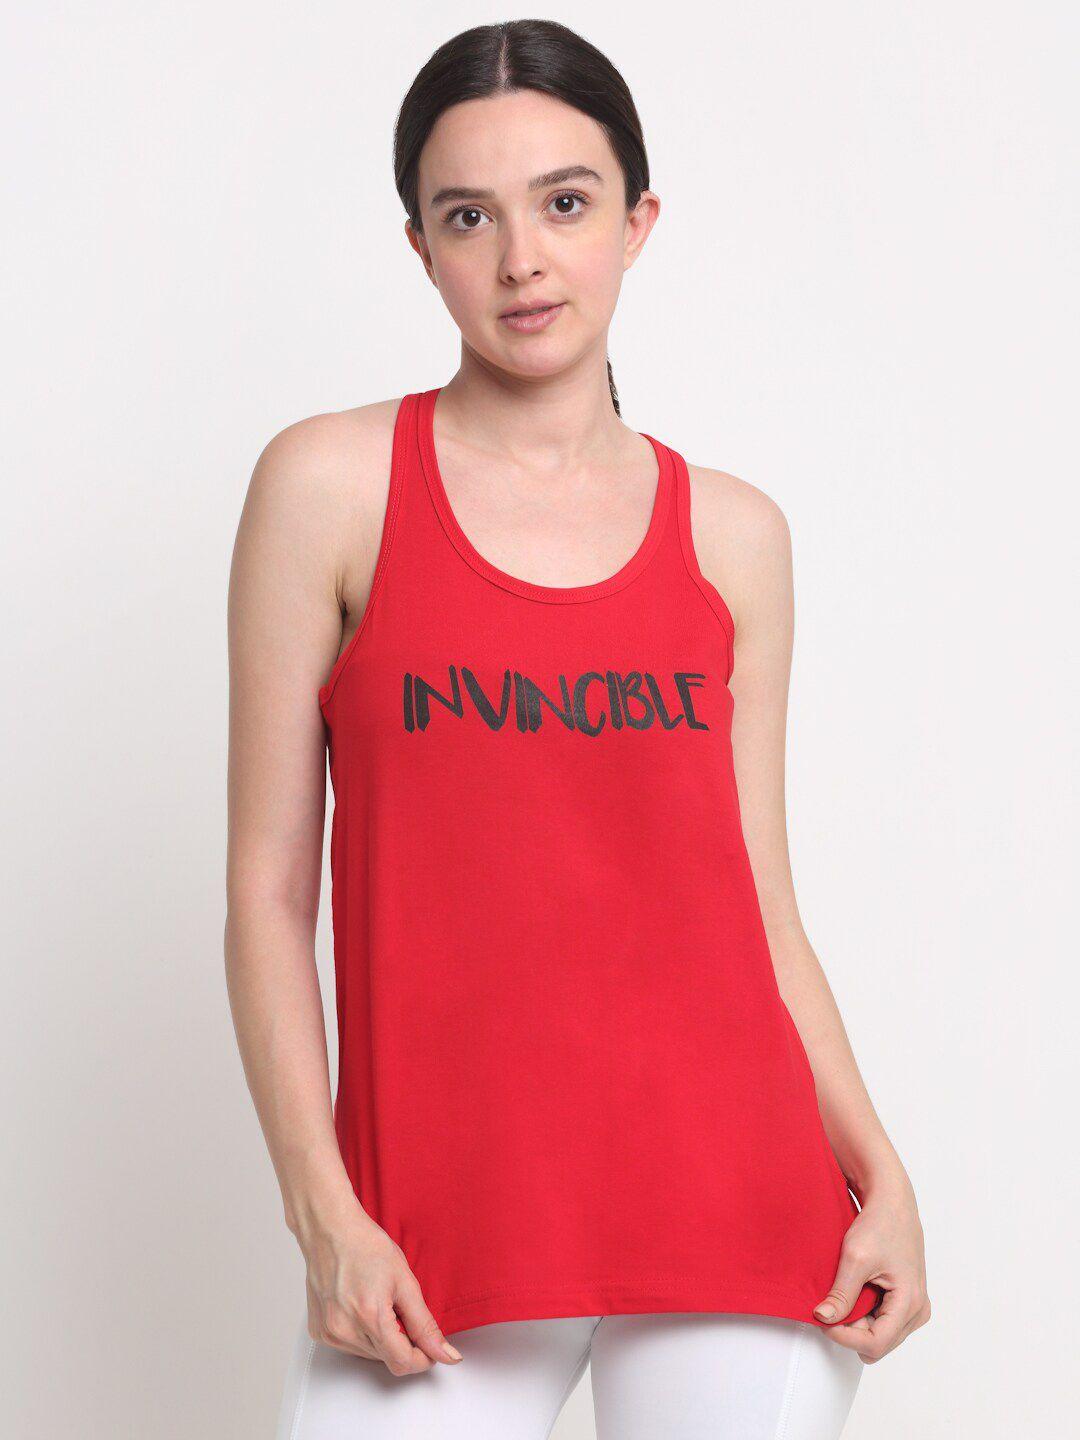 invincible typography printed dri-fit cotton t-shirt